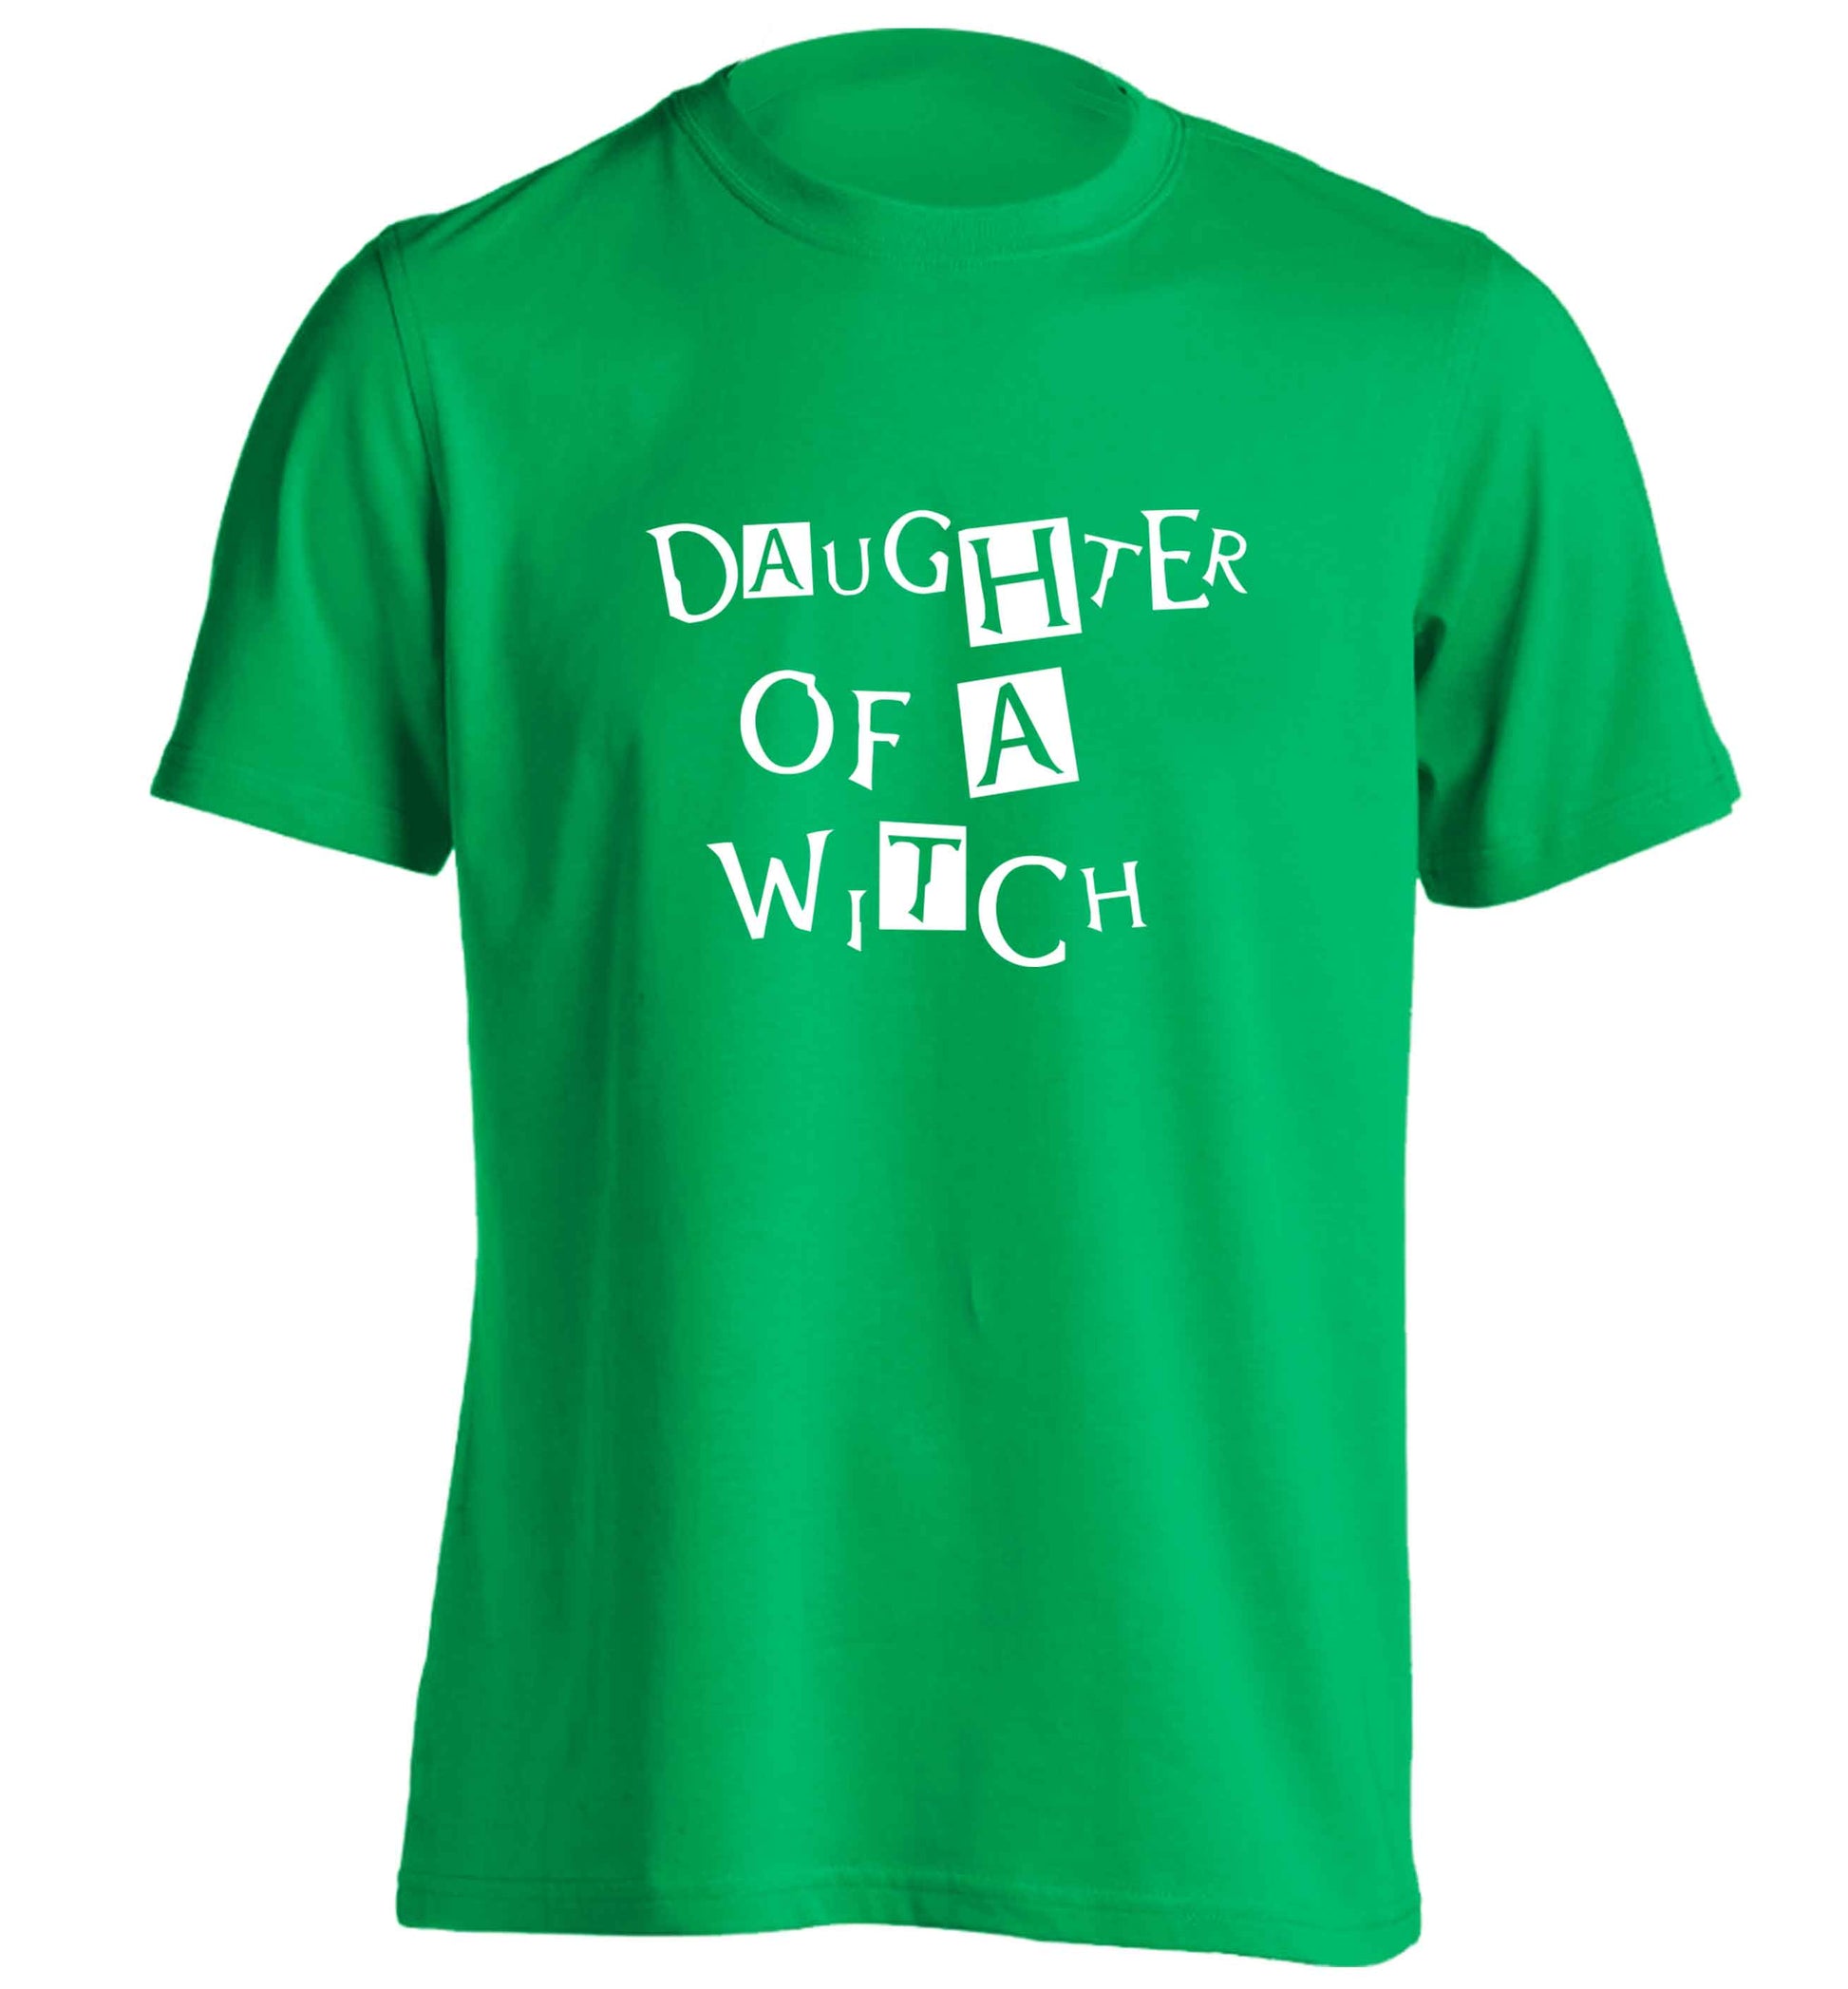 Daughter of a witch adults unisex green Tshirt 2XL